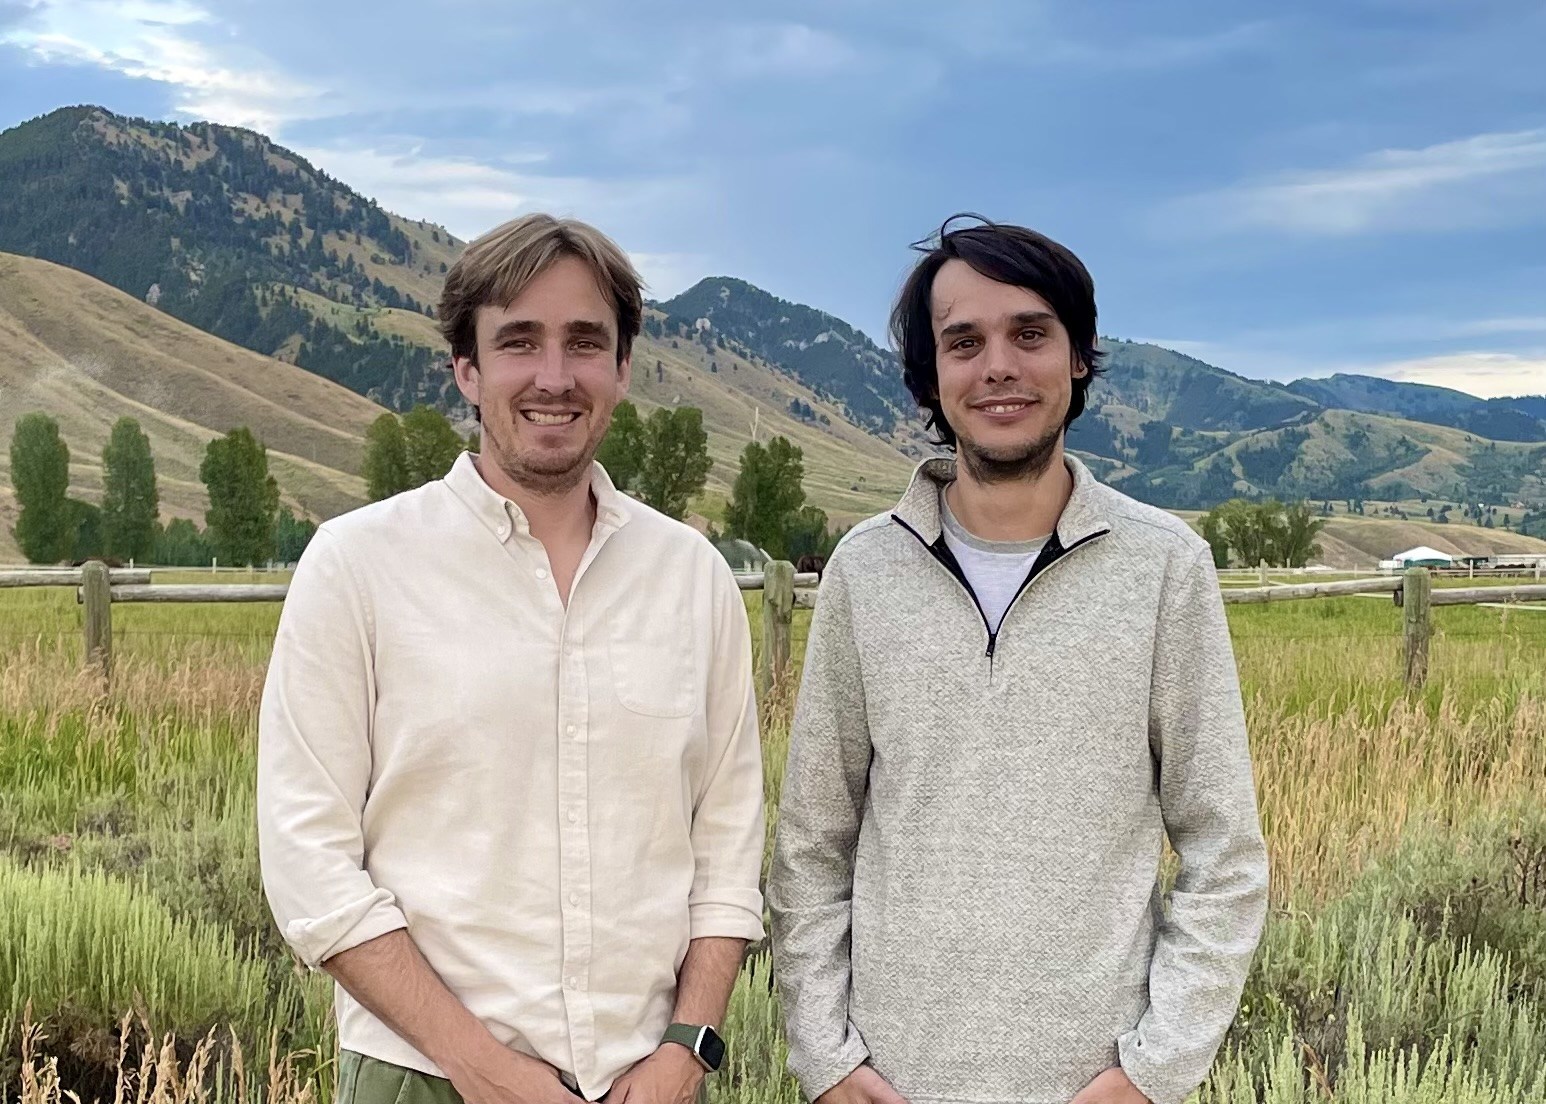 Nudge Security co-founders Russell Spitler and Jaime Blasco stand in front of a mountain range